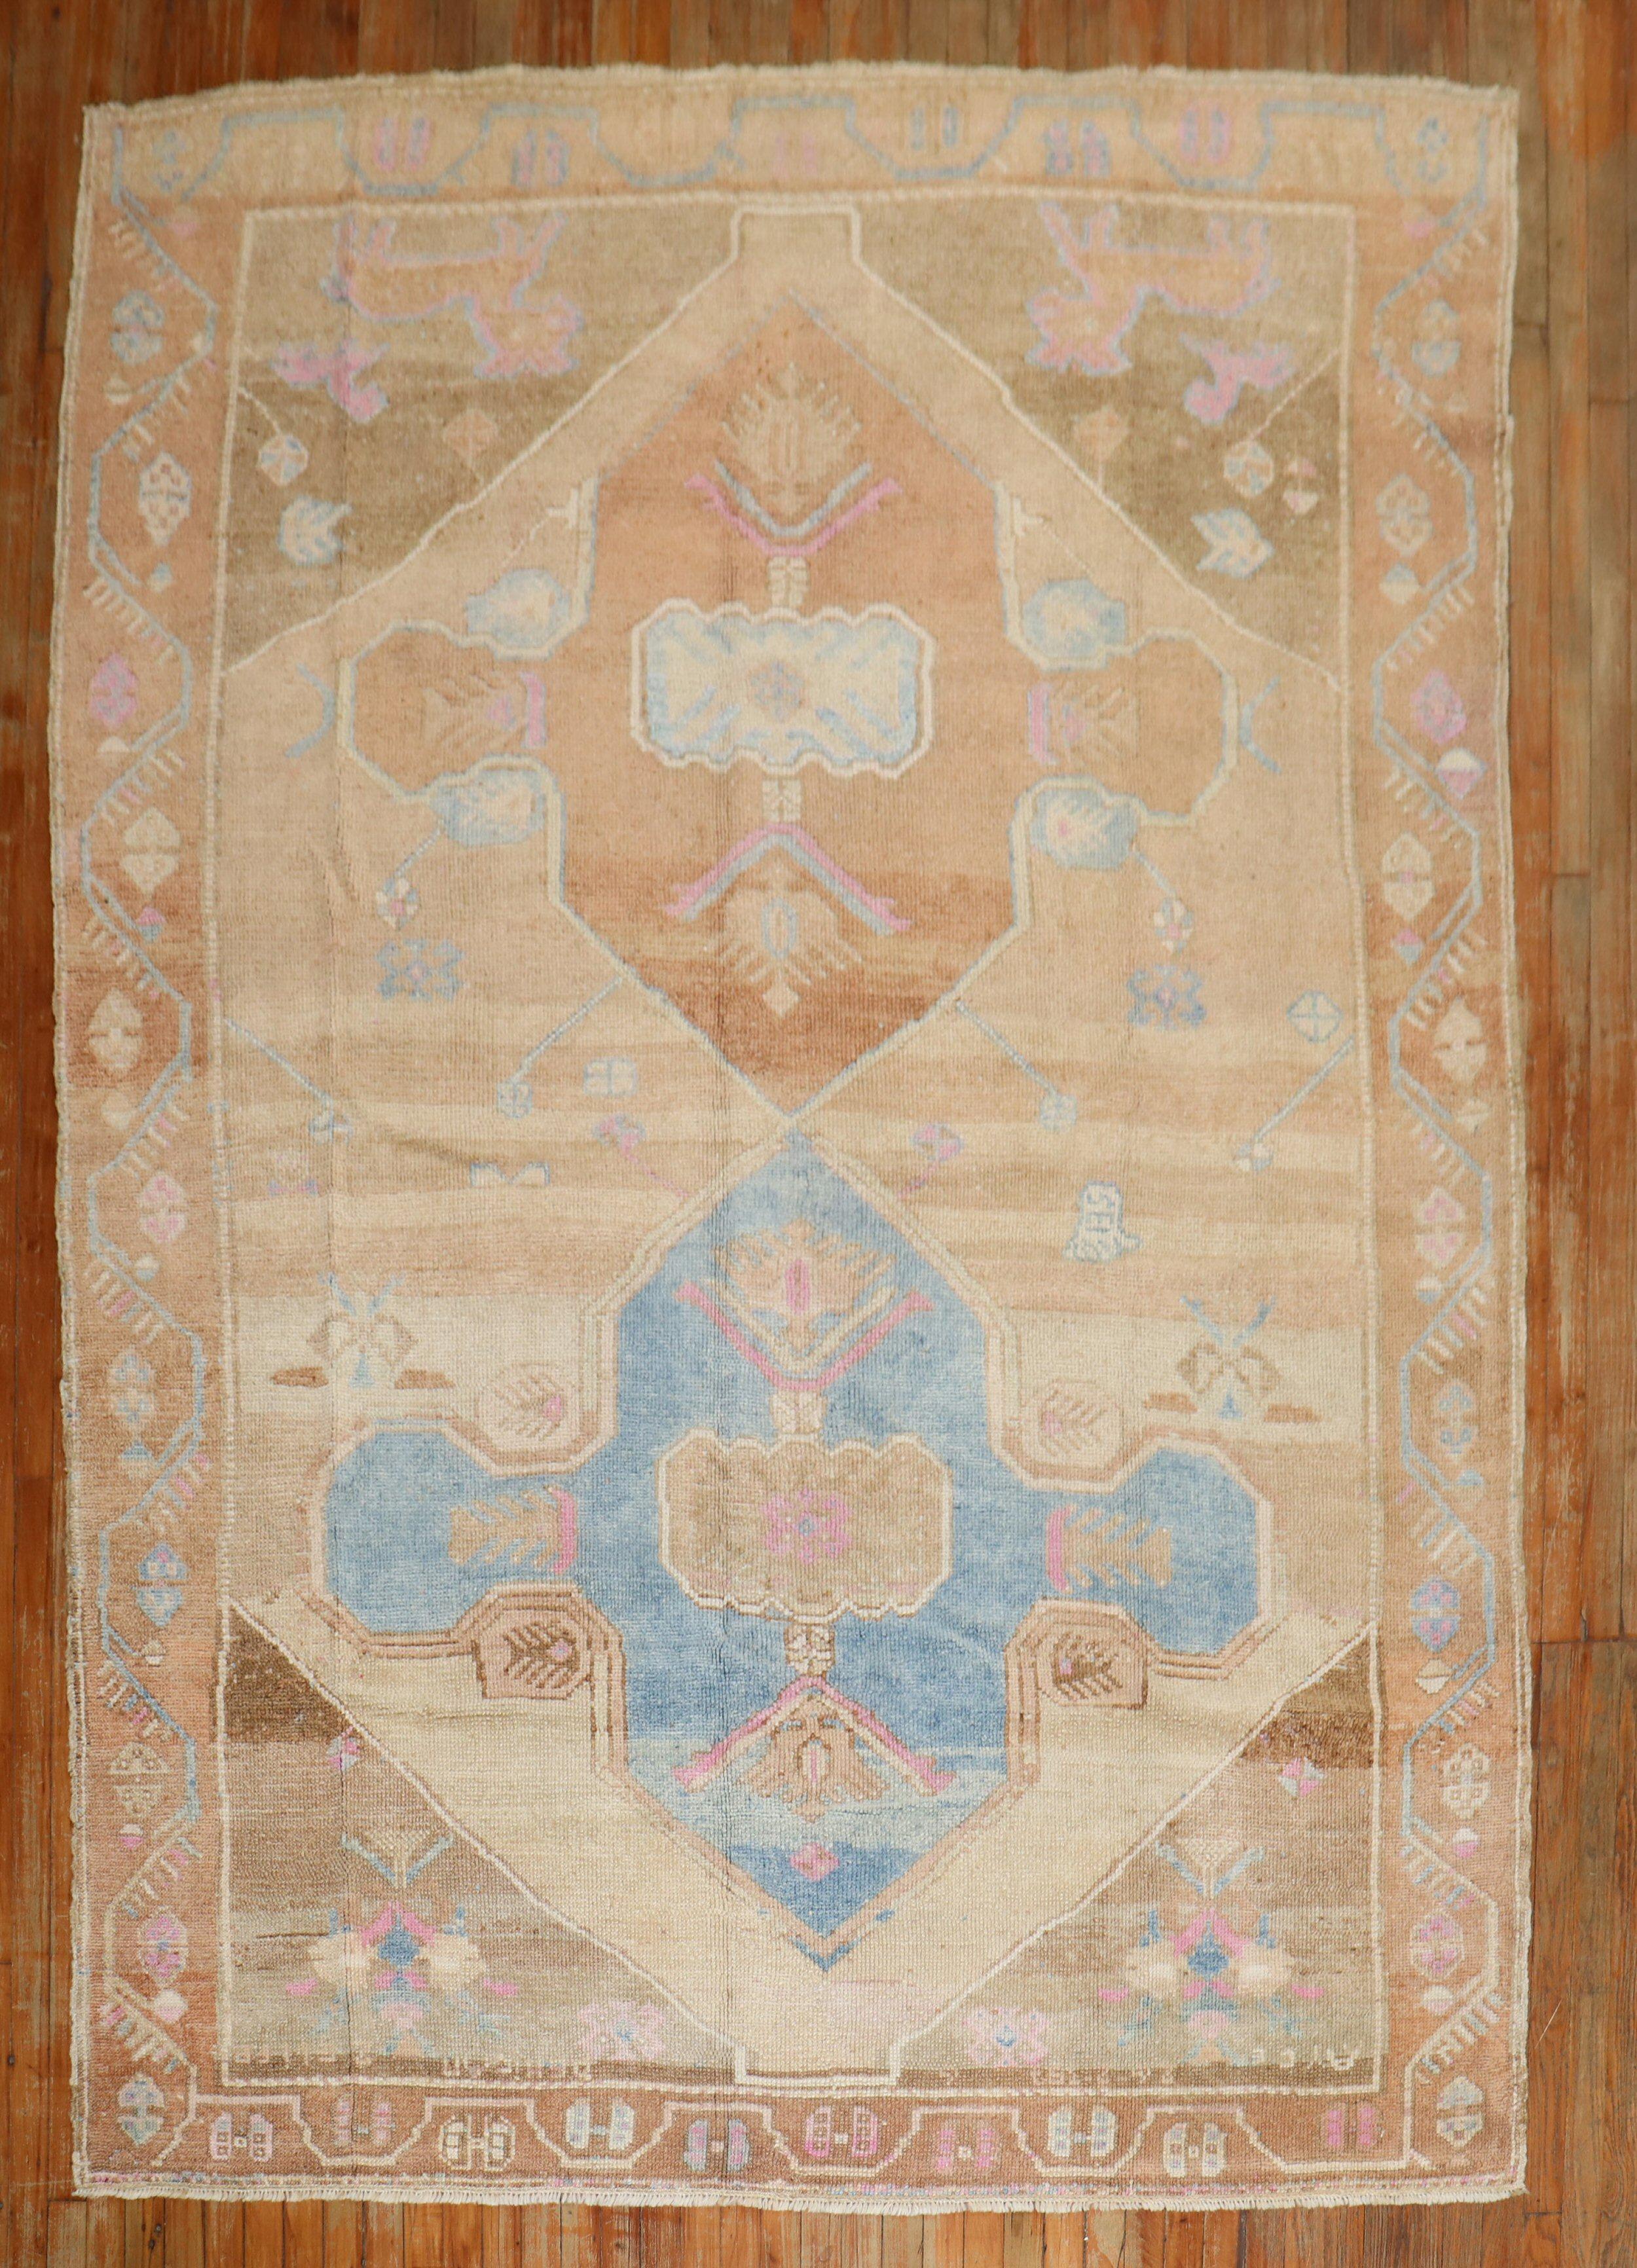 A room-size geometric Turkish kars rug from the 3rd quarter of the 20th century with 2 large brown medallions on a khaki ground, accents in sky blue , brown, and pink

Measures: 7' x 9'7